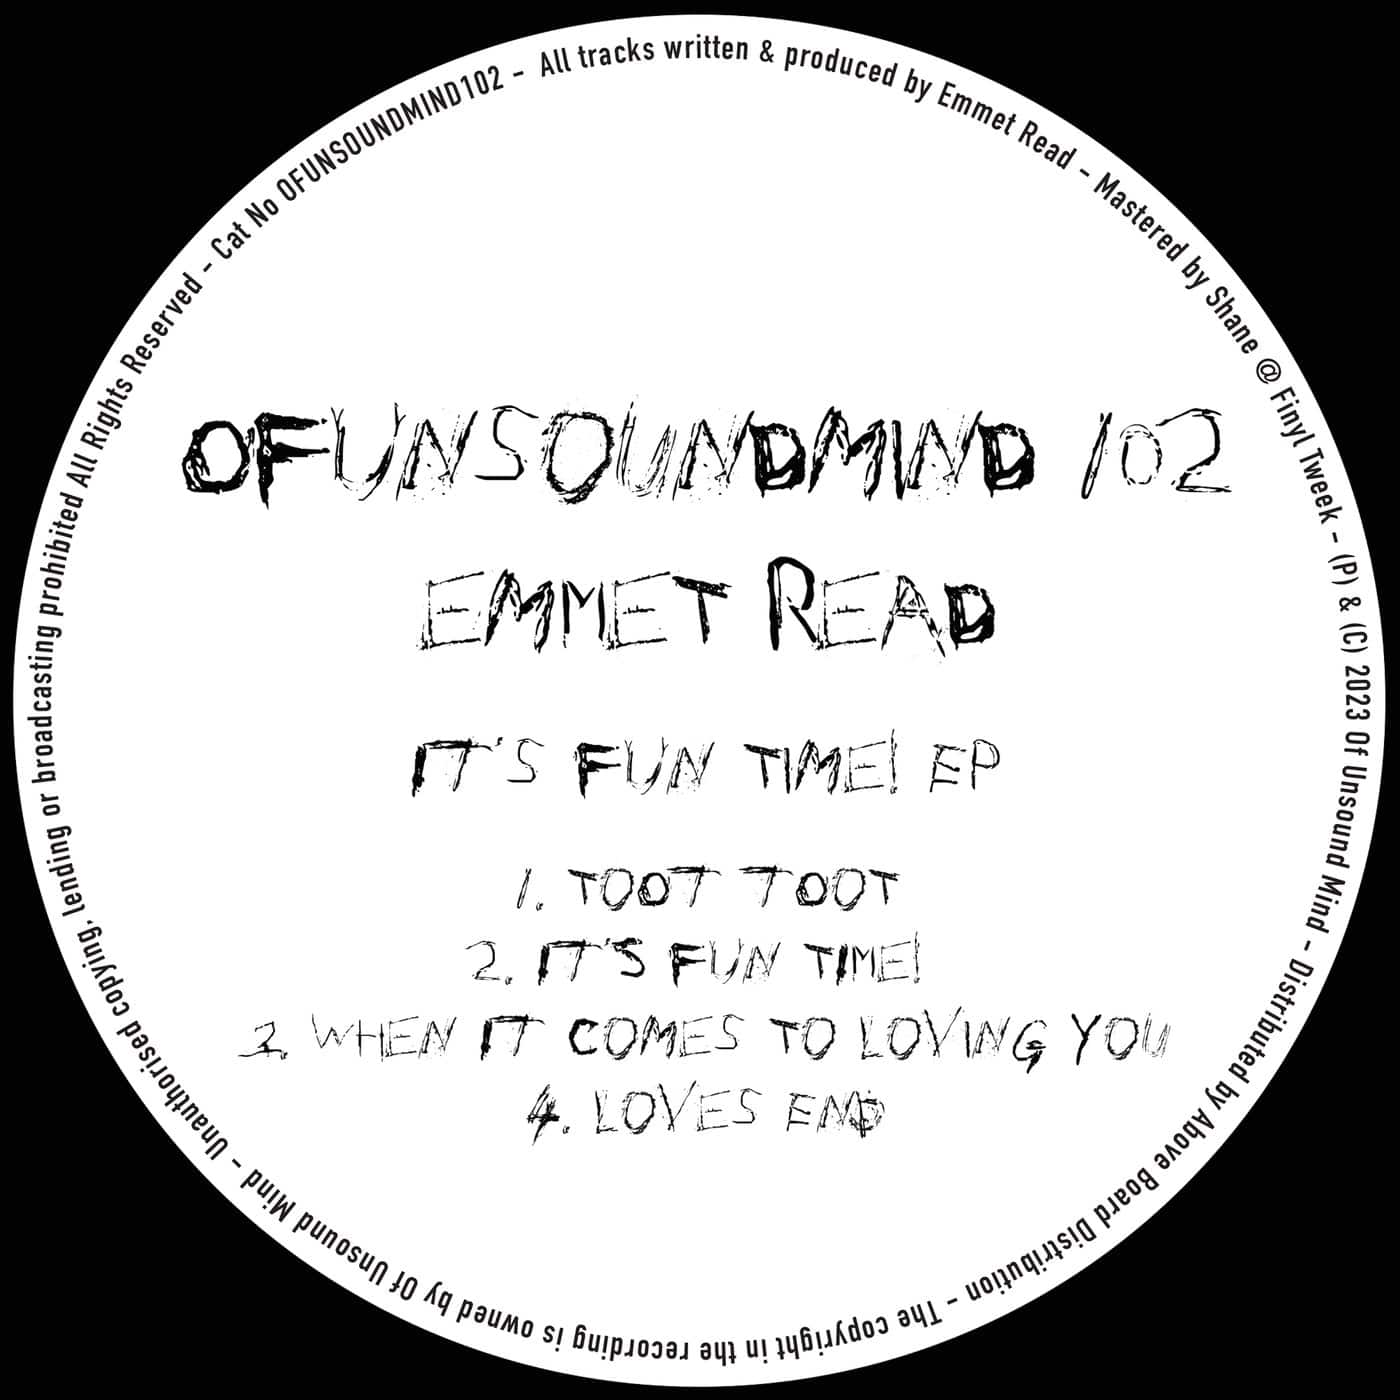 image cover: Emmet Read - Its Fun Time! EP / OFUNSOUNDMIND102